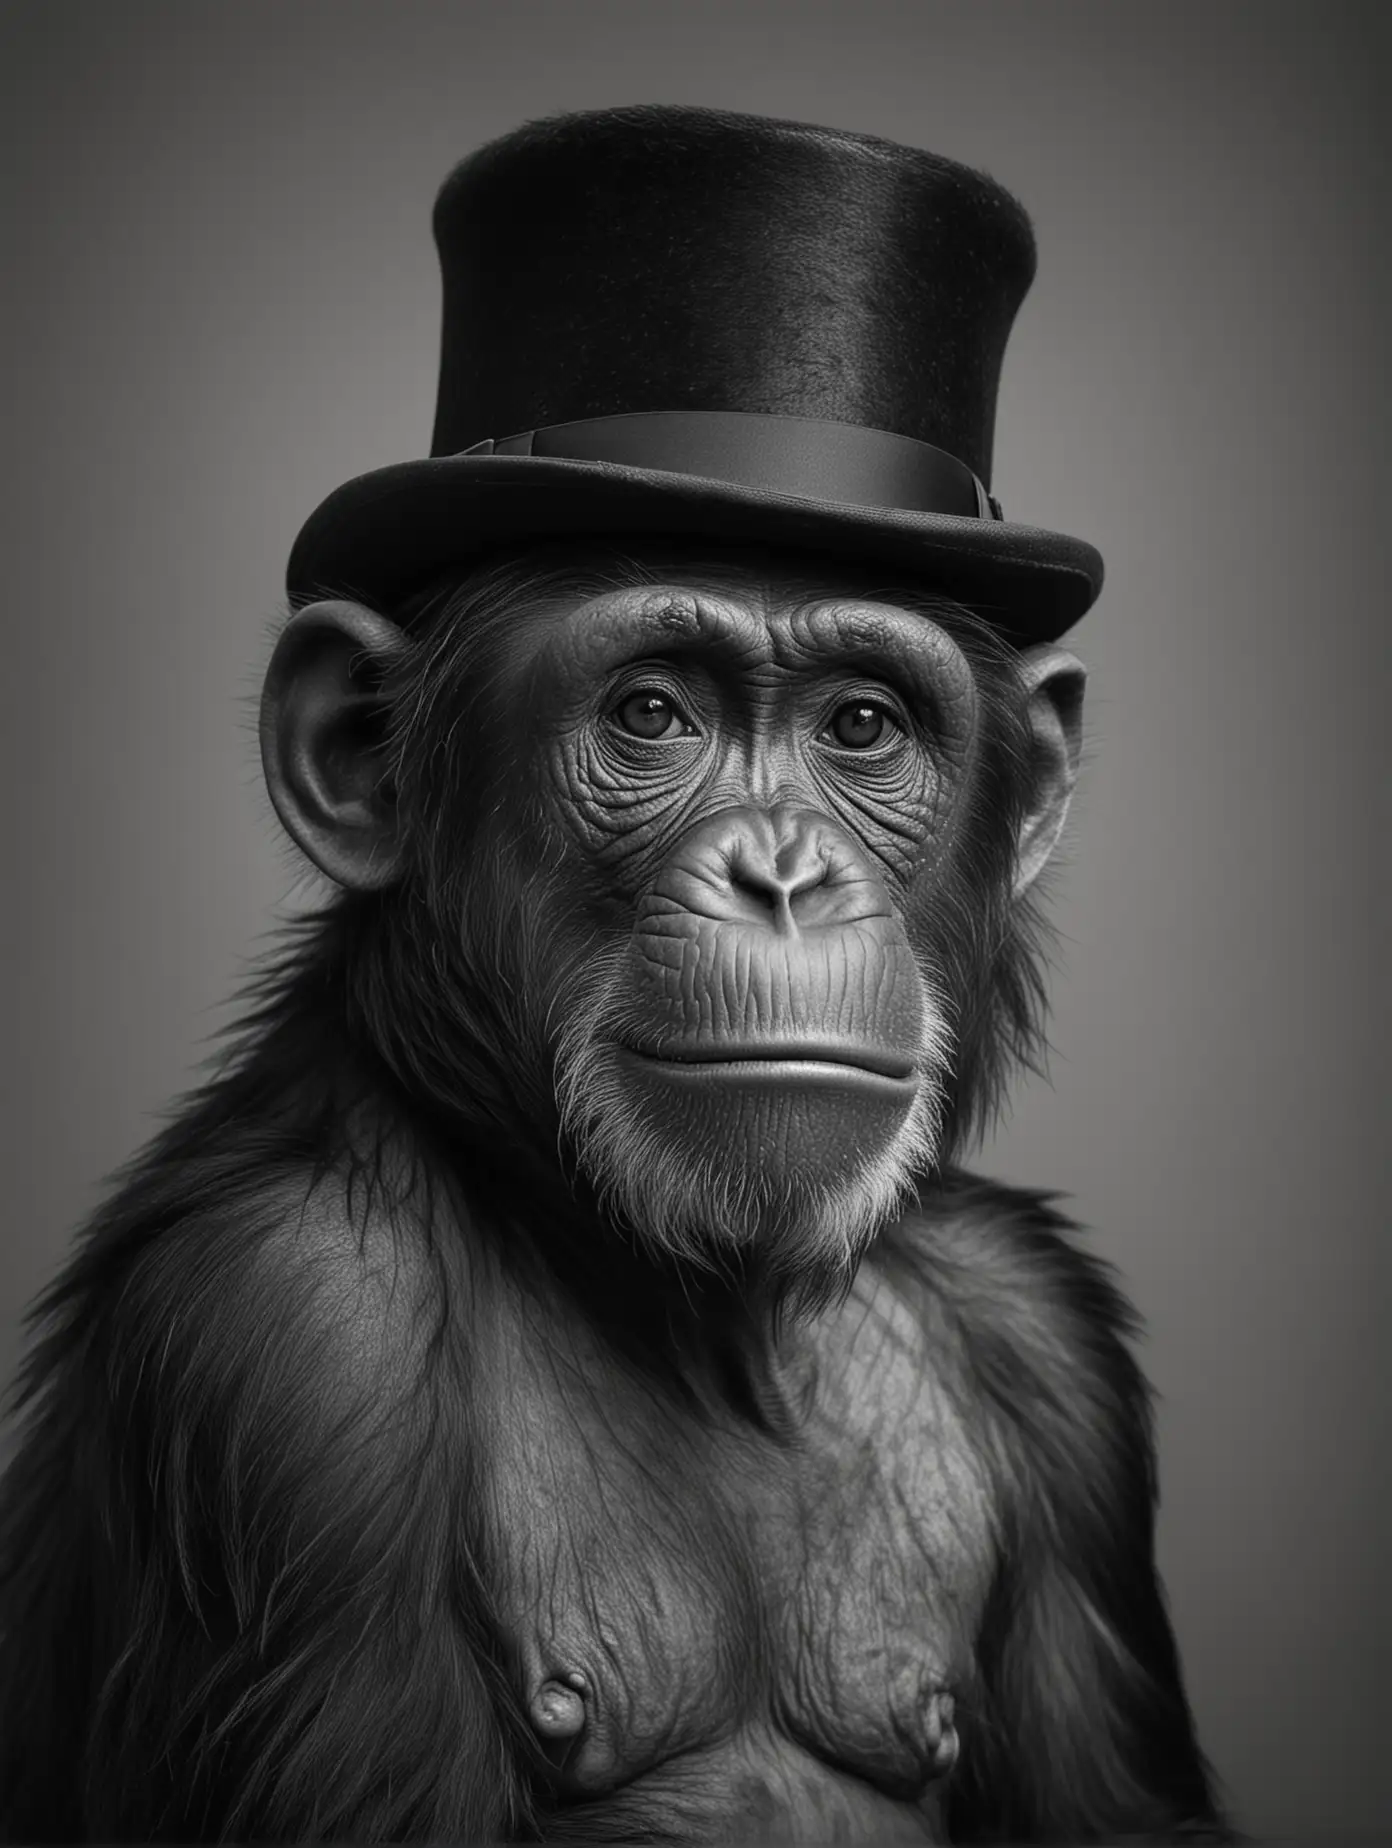 Chimpanzee with a black top hat, sad, black andd white, very clear and 4k quality photo